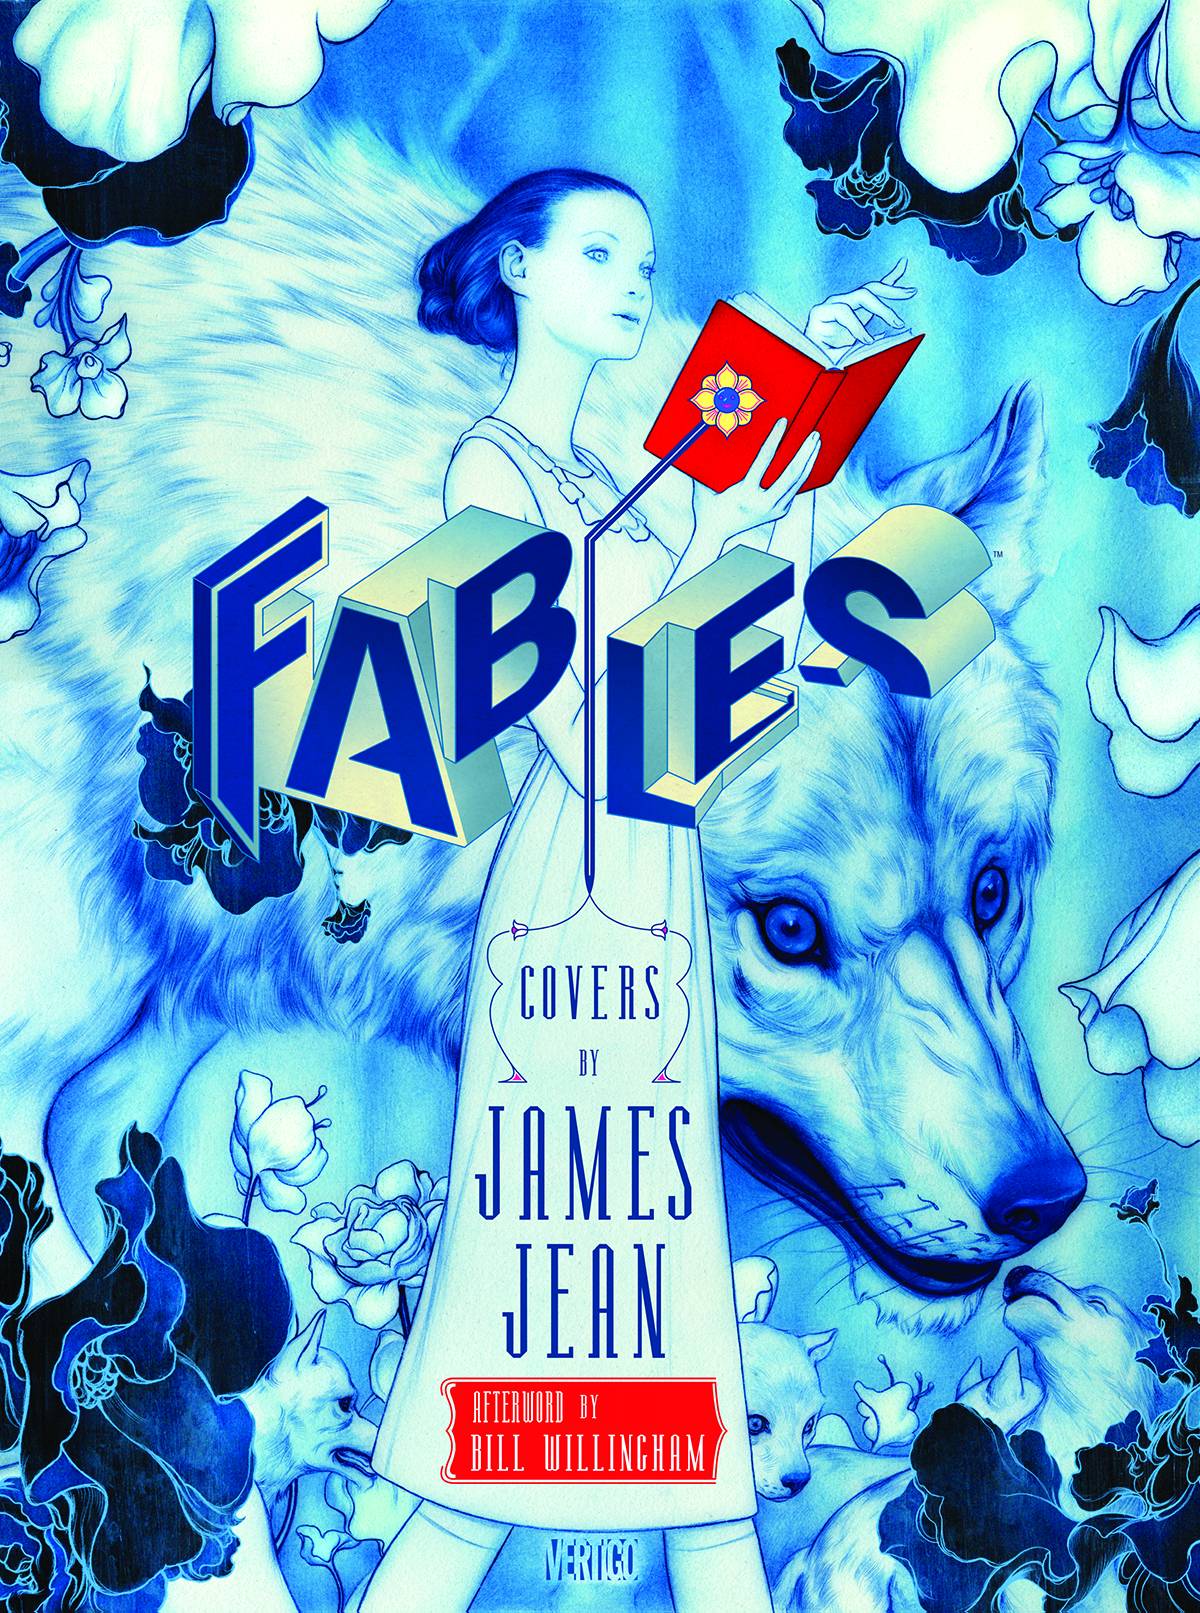 James jean fables covers